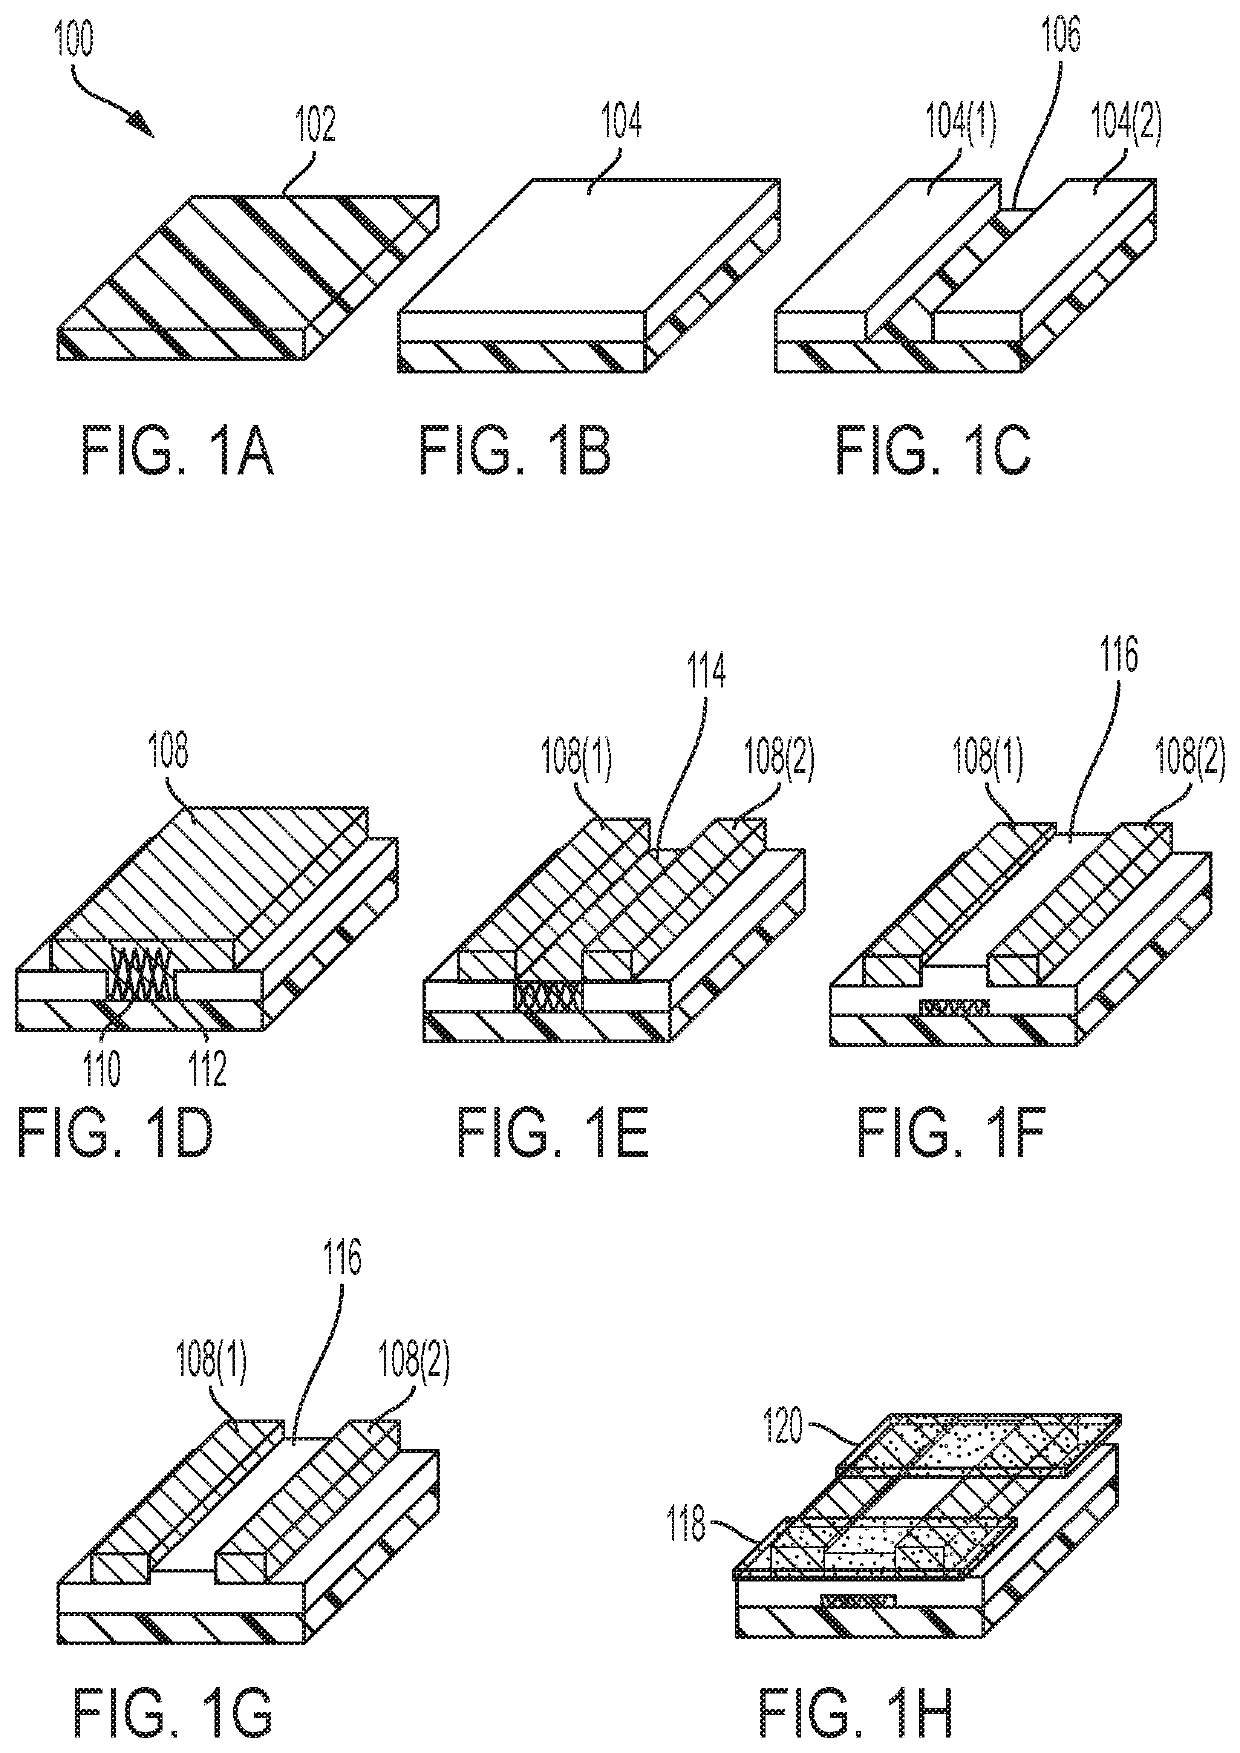 Fabrication of electronic devices using sacrificial seed layers